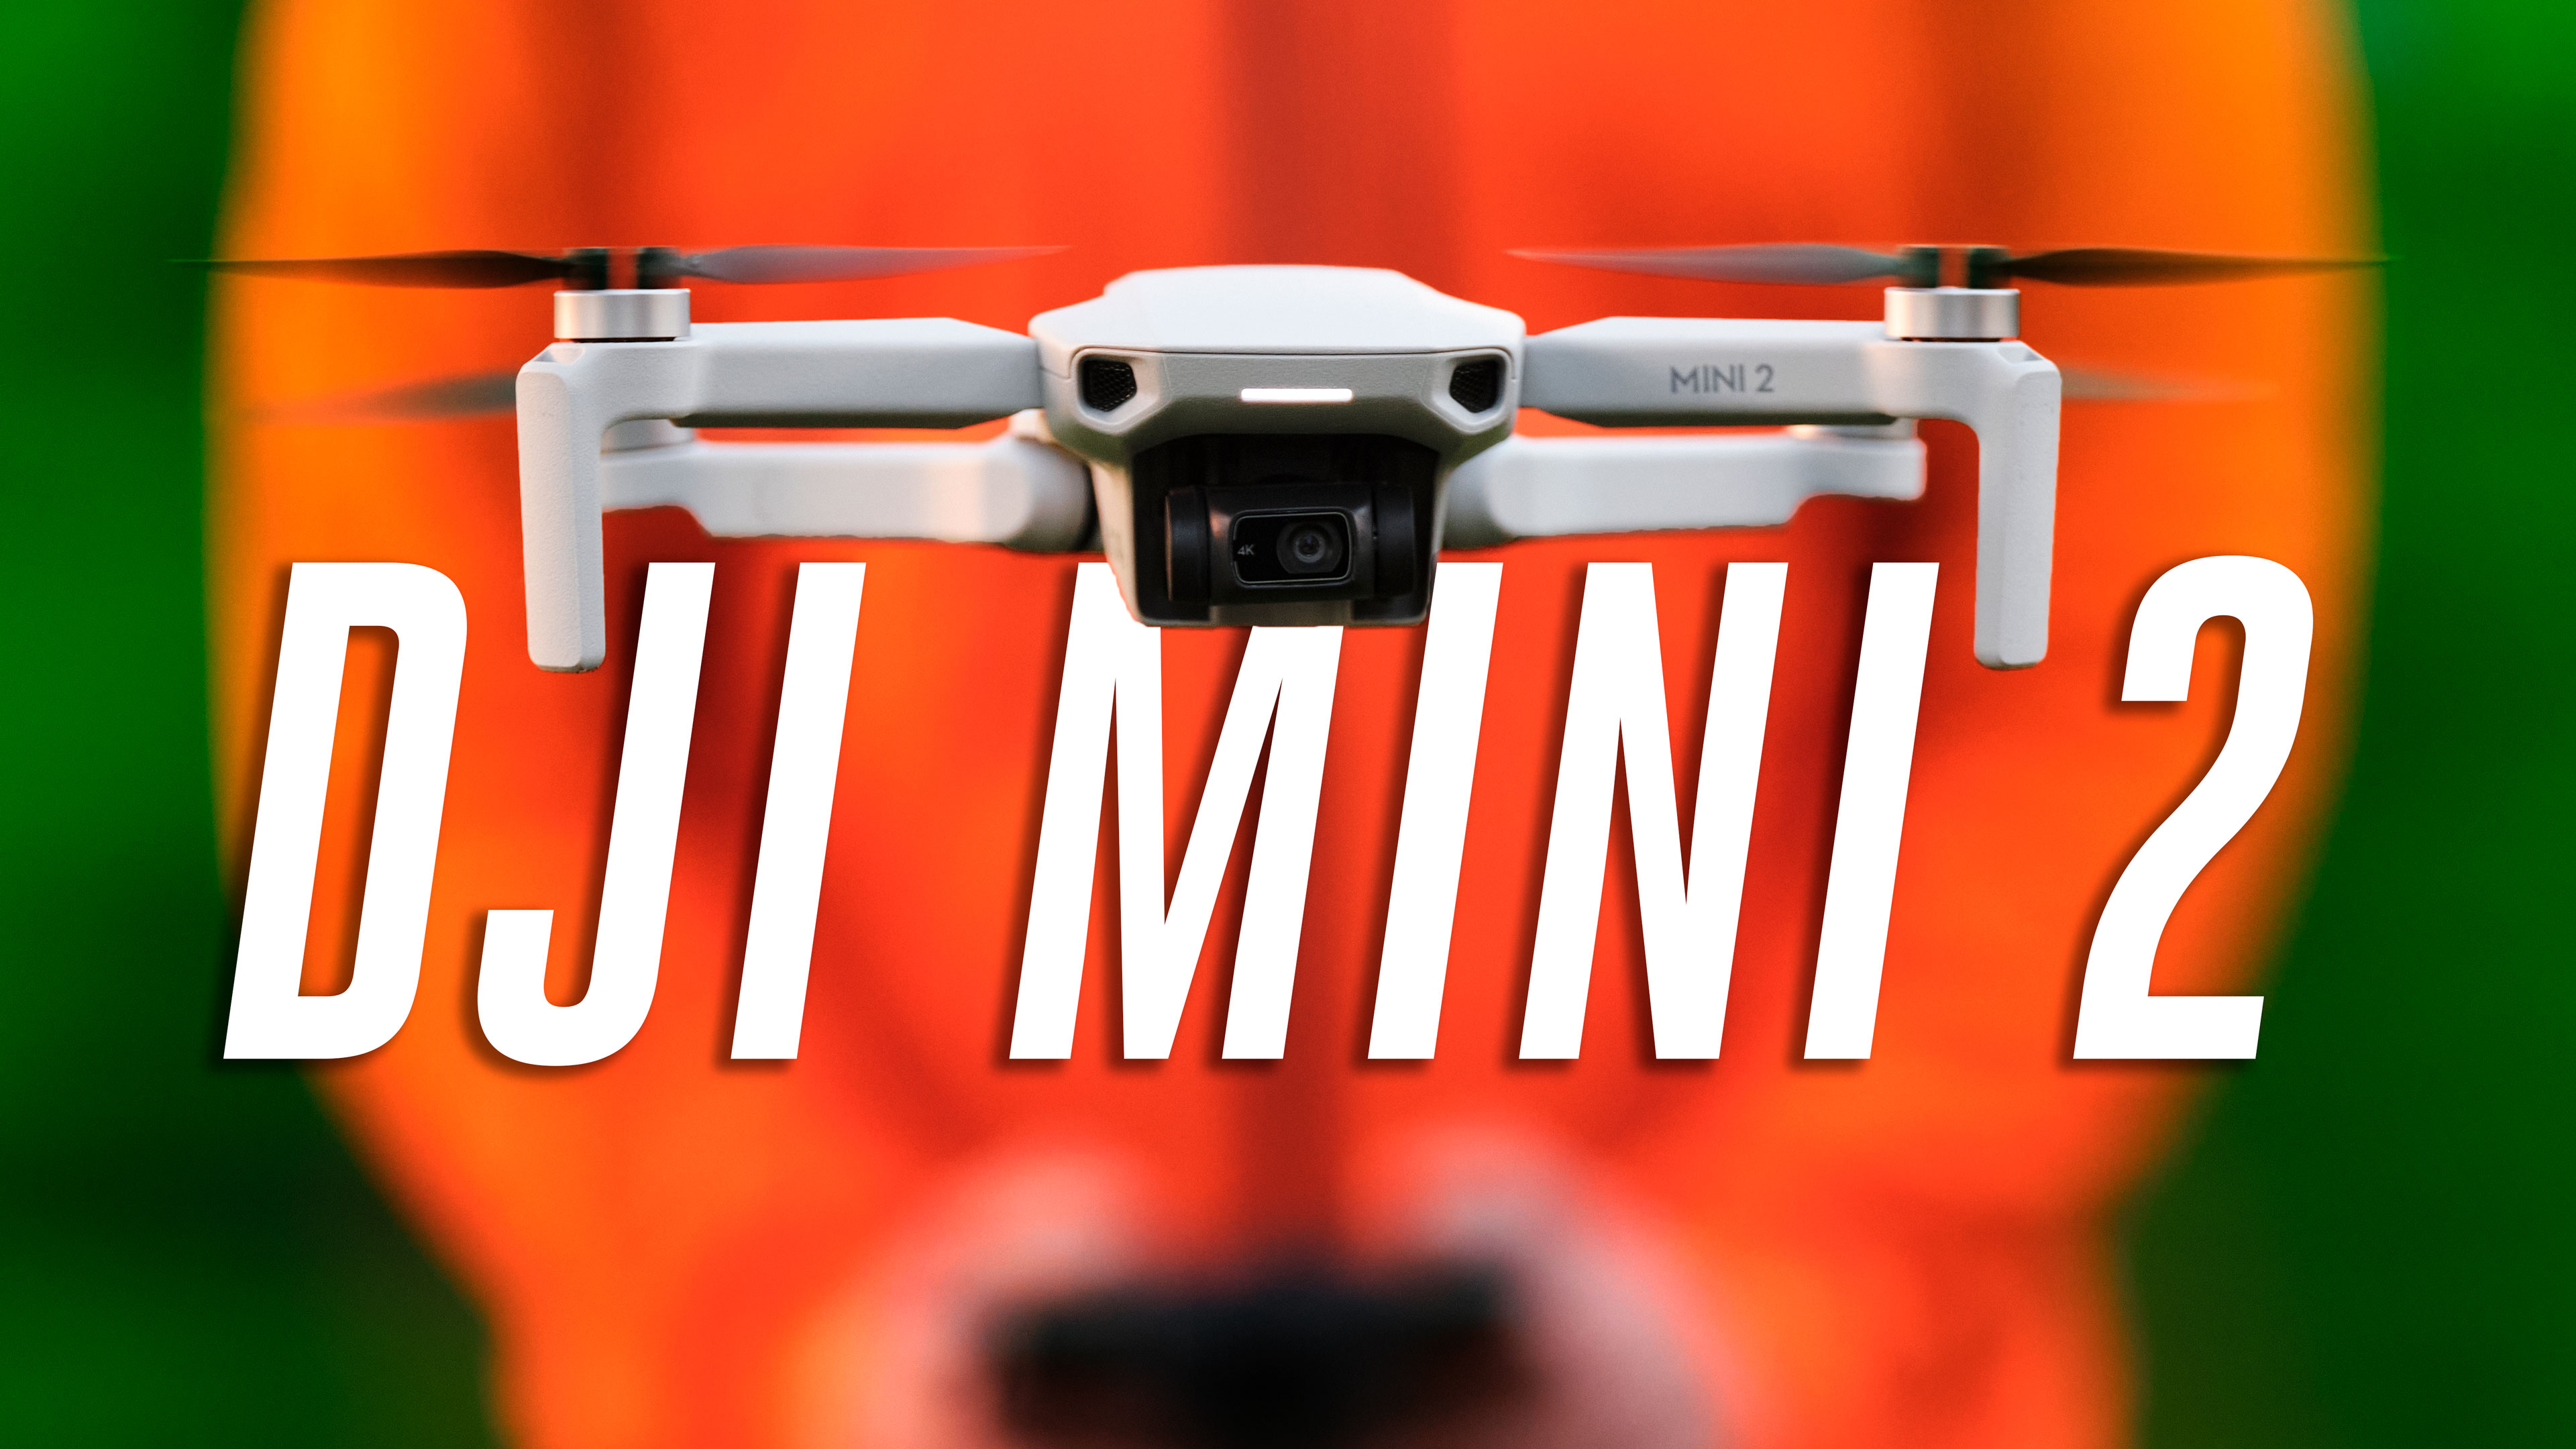 DJI Mini 2 review: the best drone under $500 - The Verge